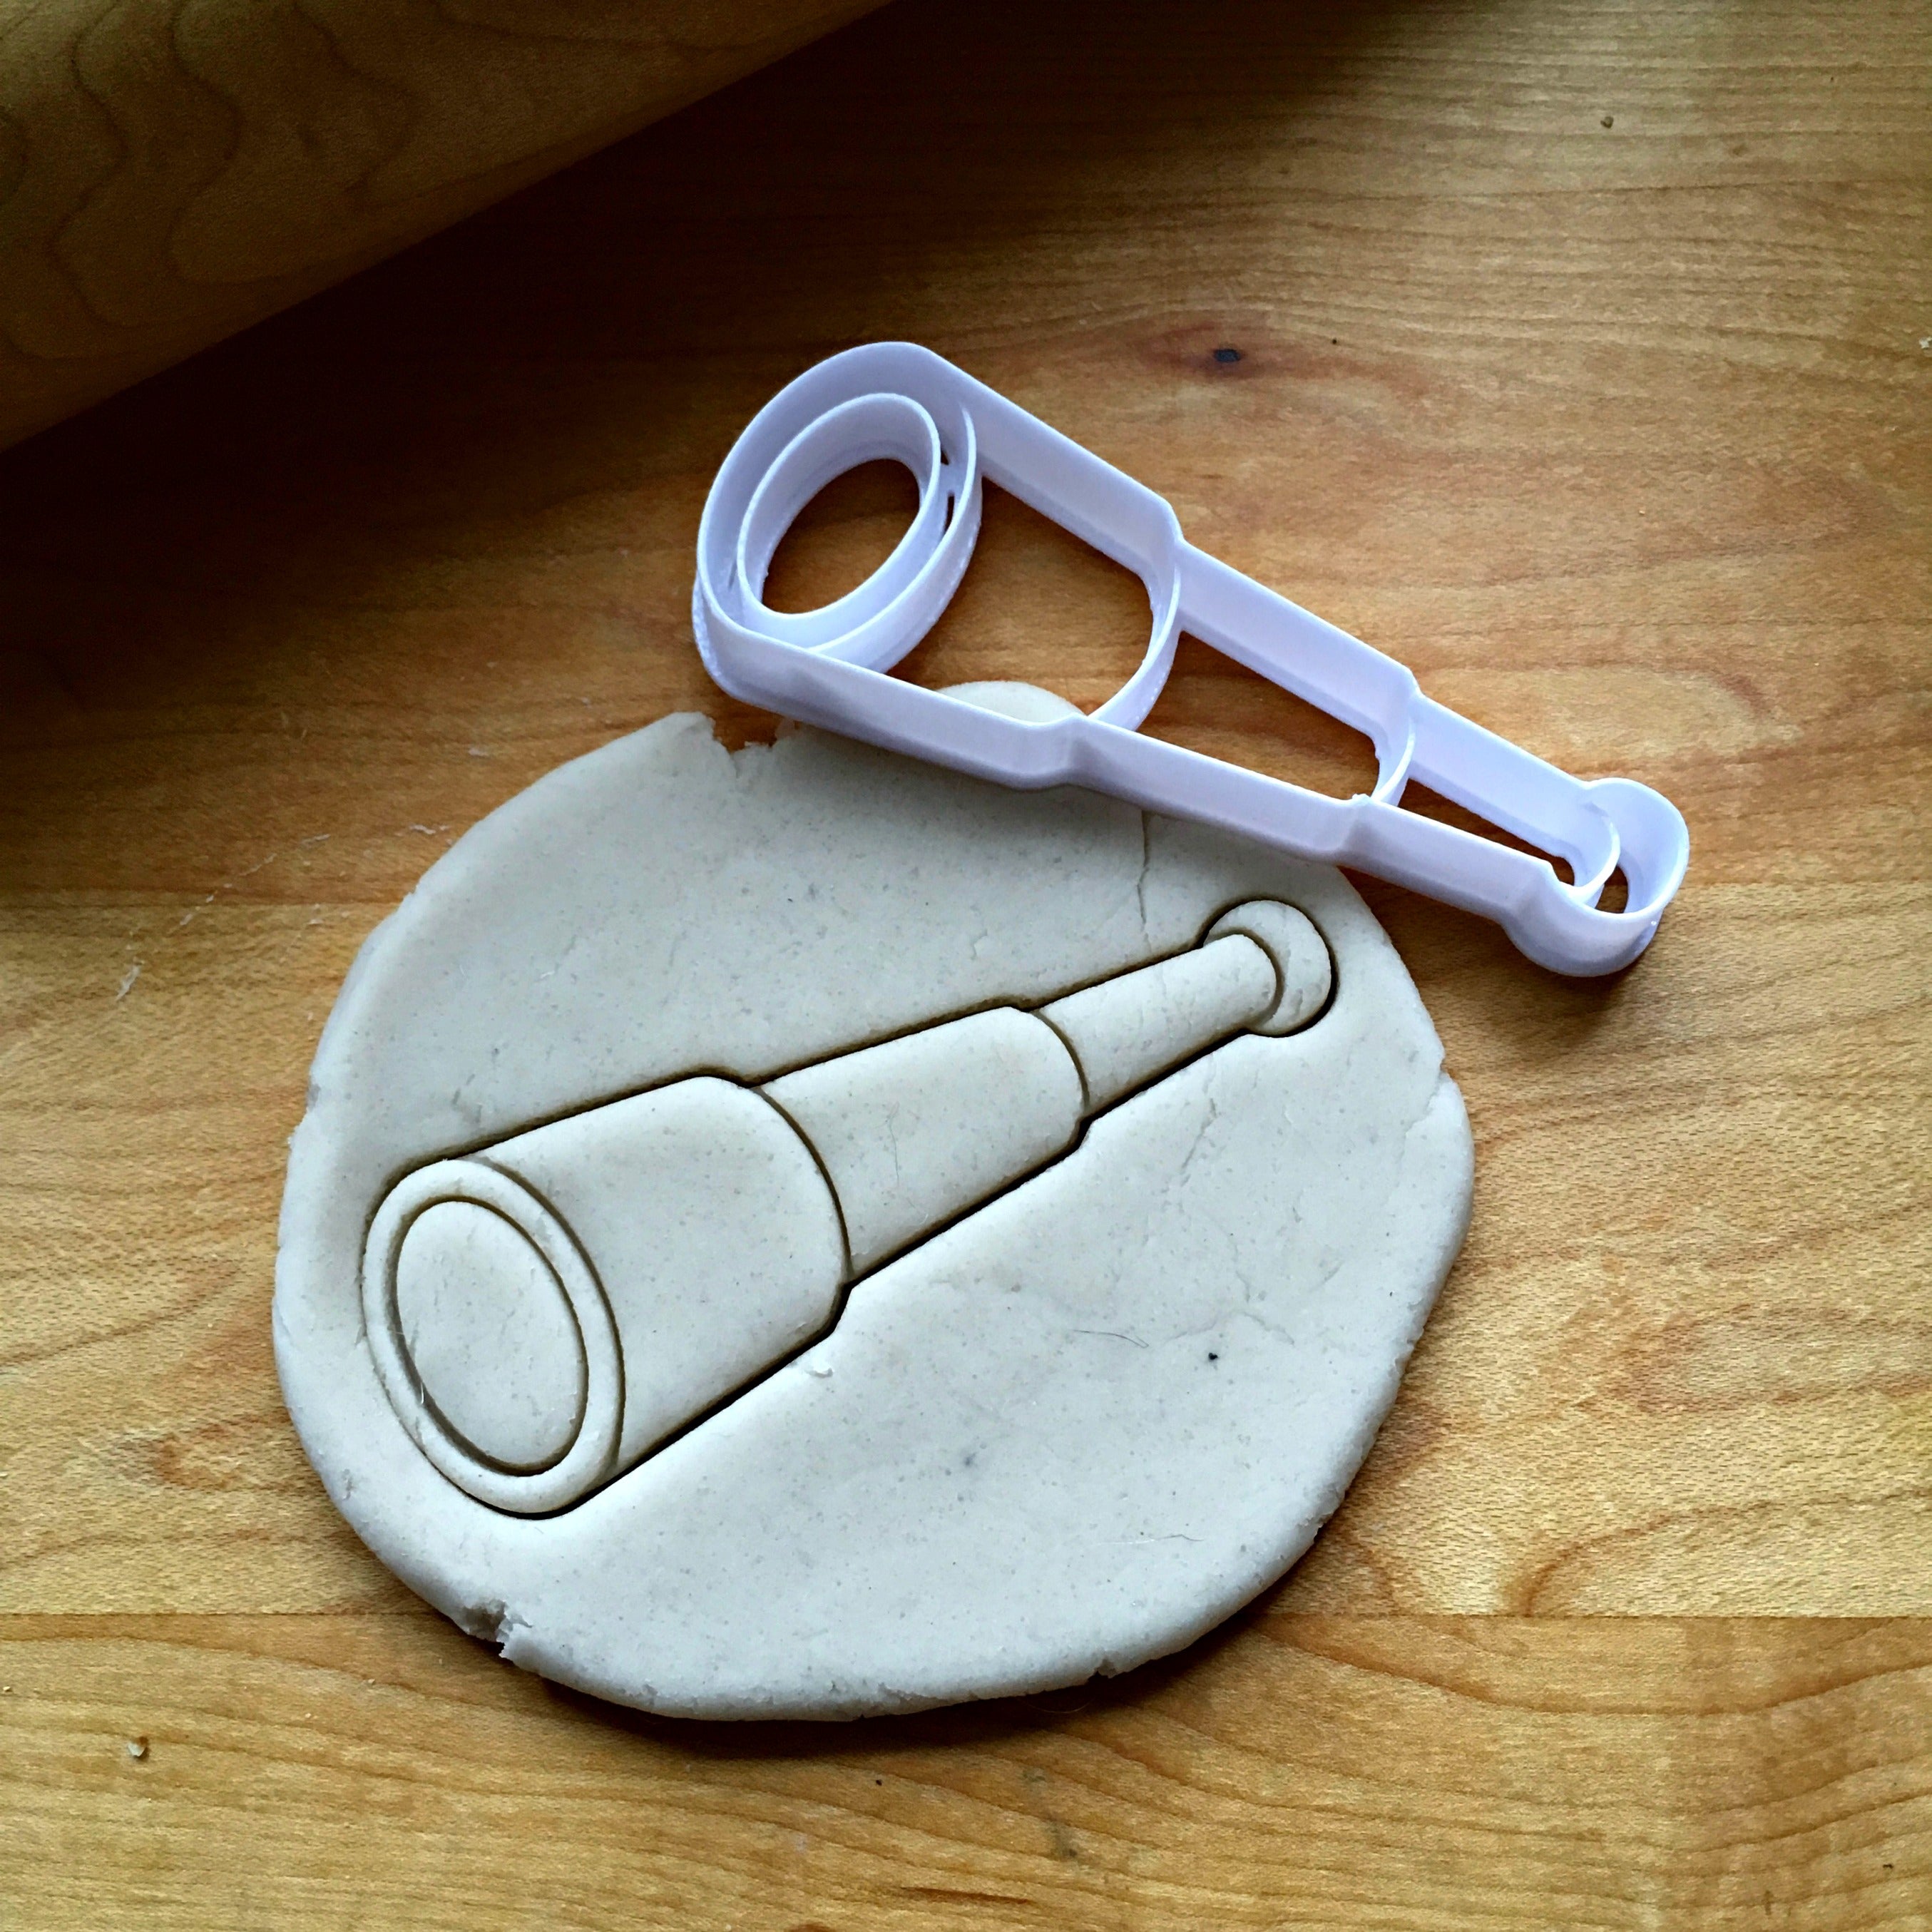 Pirate Looking Glass Cookie Cutter/Dishwasher Safe